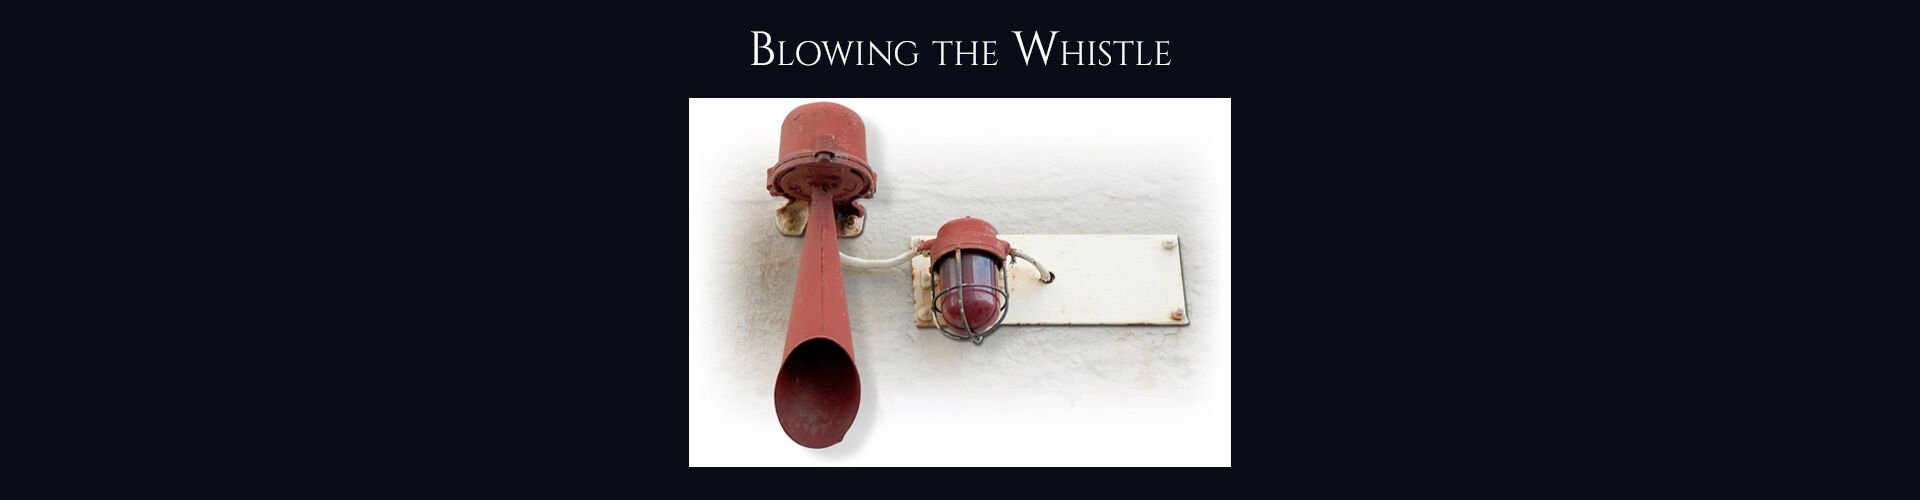 Blowing The Whistle - Absent Justice